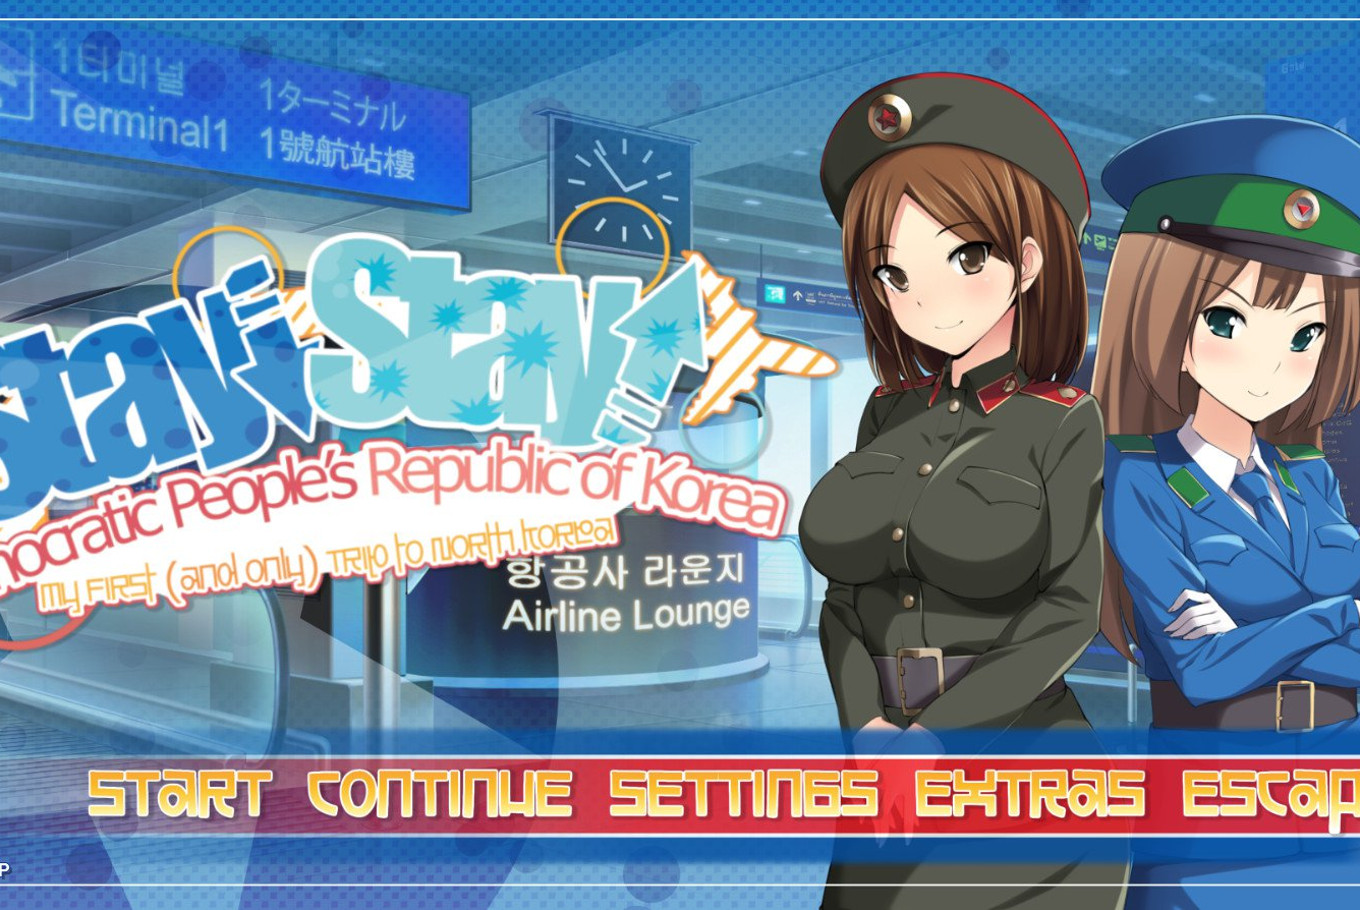 Get a North Korean 'waifu' in new dating simulator game - Science & Tech -  The Jakarta Post